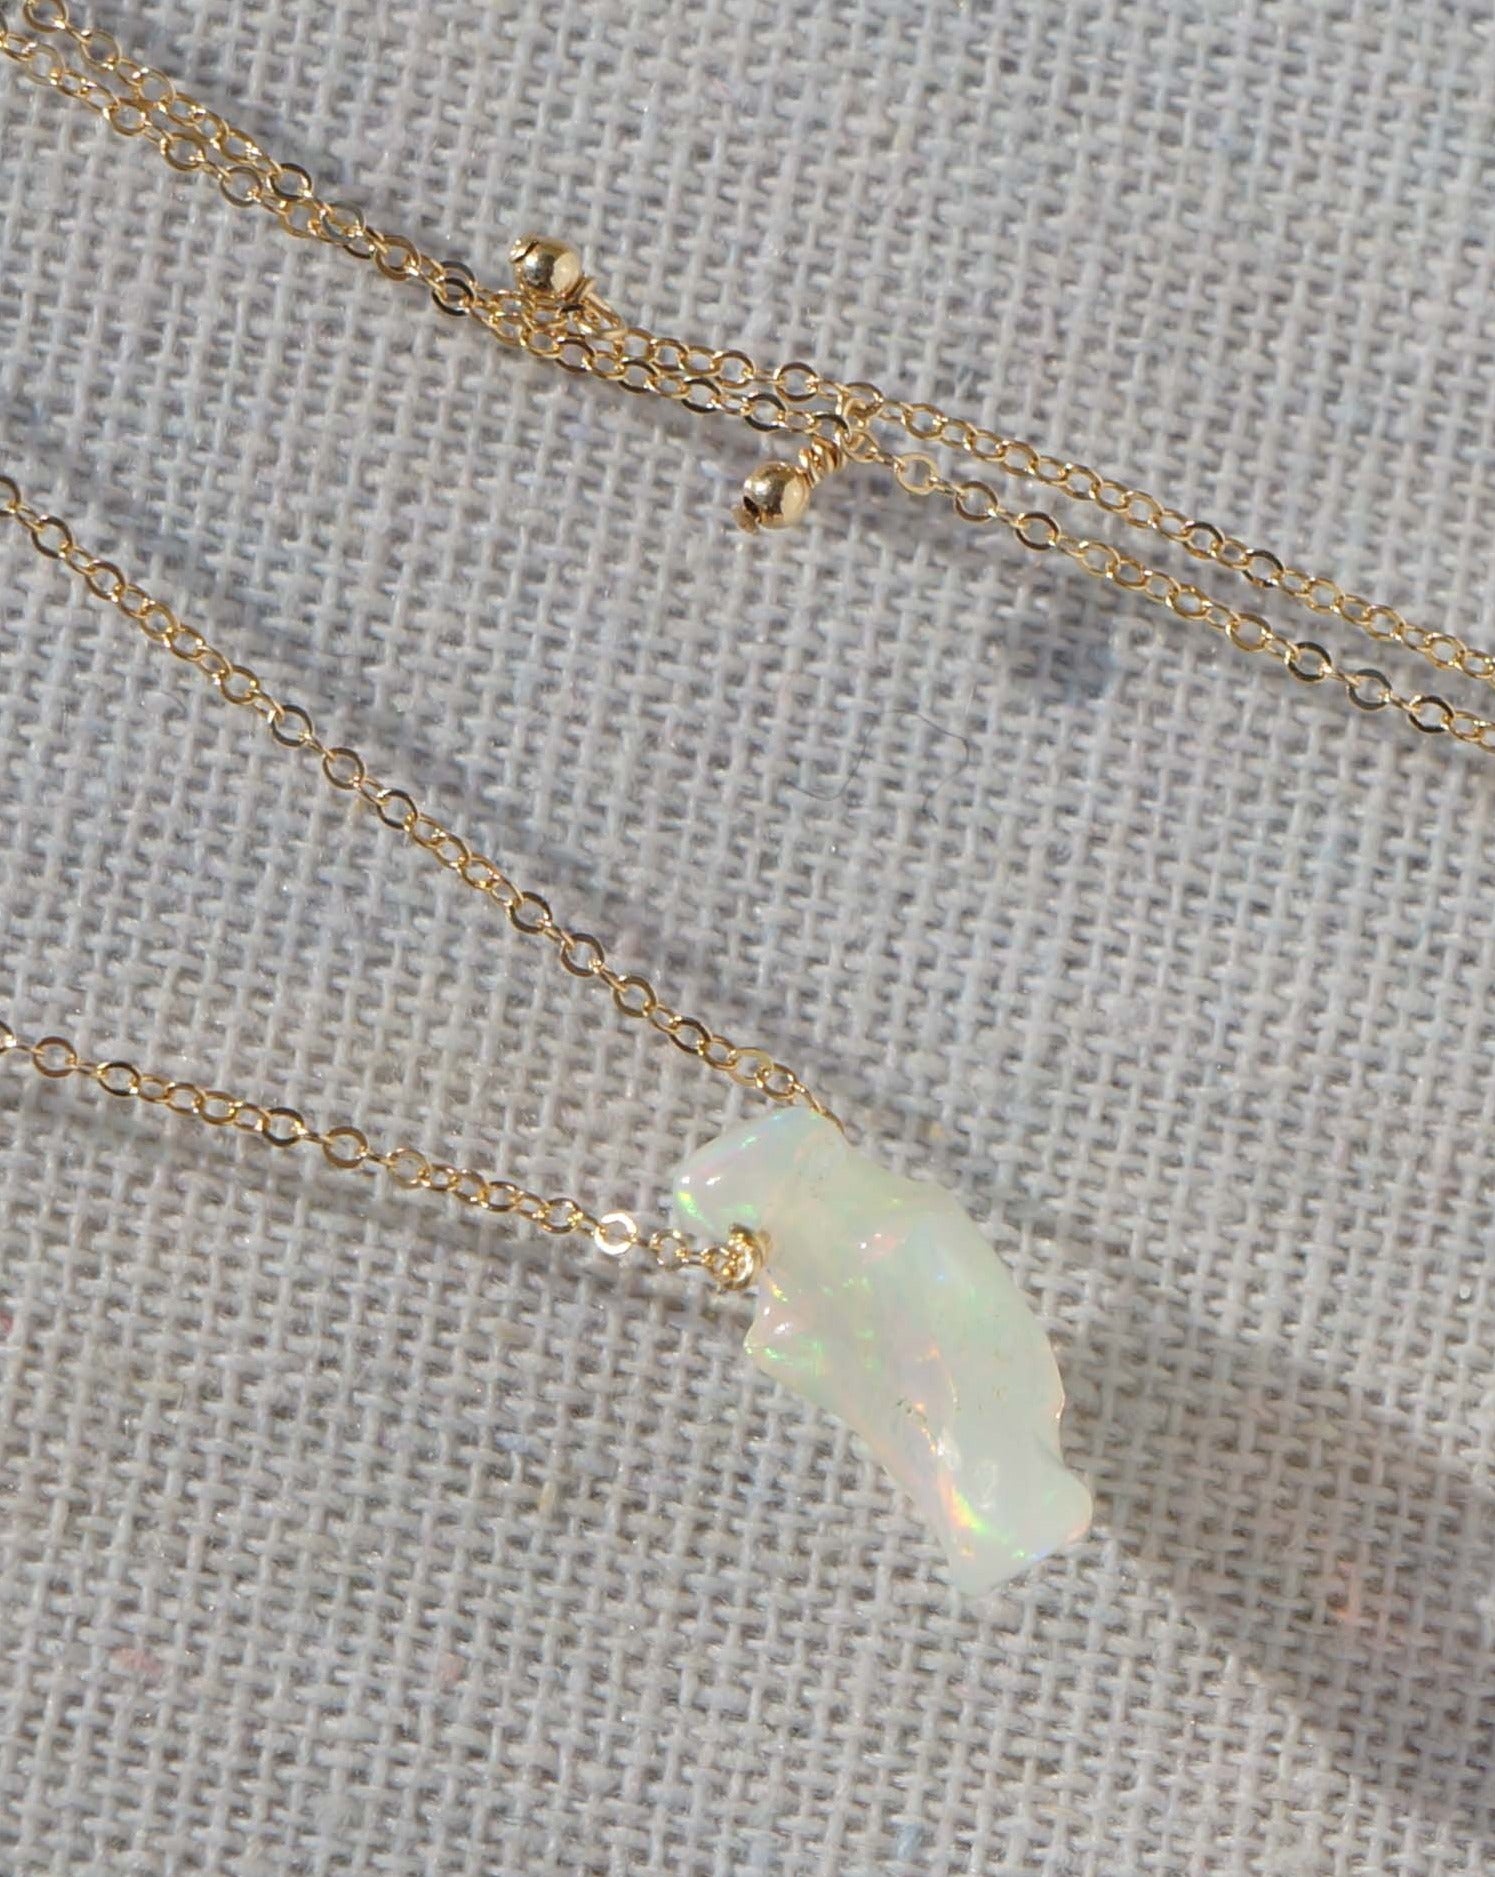 Cameena Necklace by KOZAKH. A 16 inch long necklace in 14K Gold Filled, featuring an irregular AAA+ Ethiopian Opal.